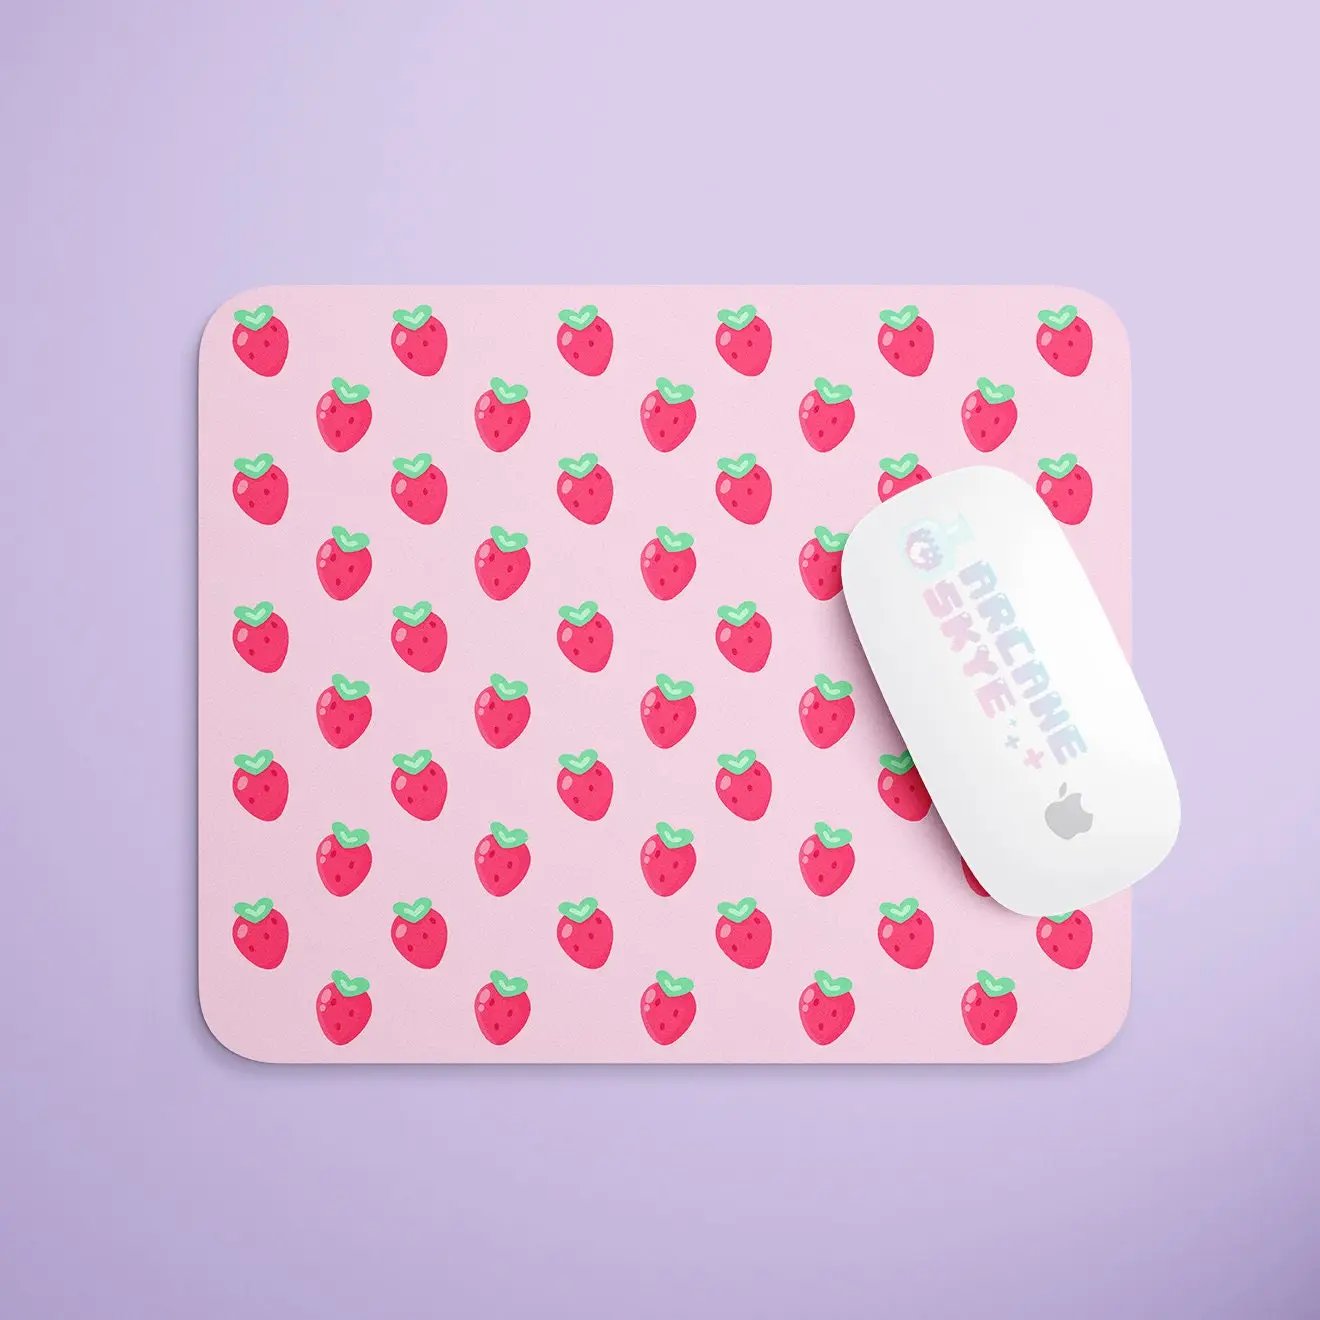 a mouse pad with a strawberry pattern on it